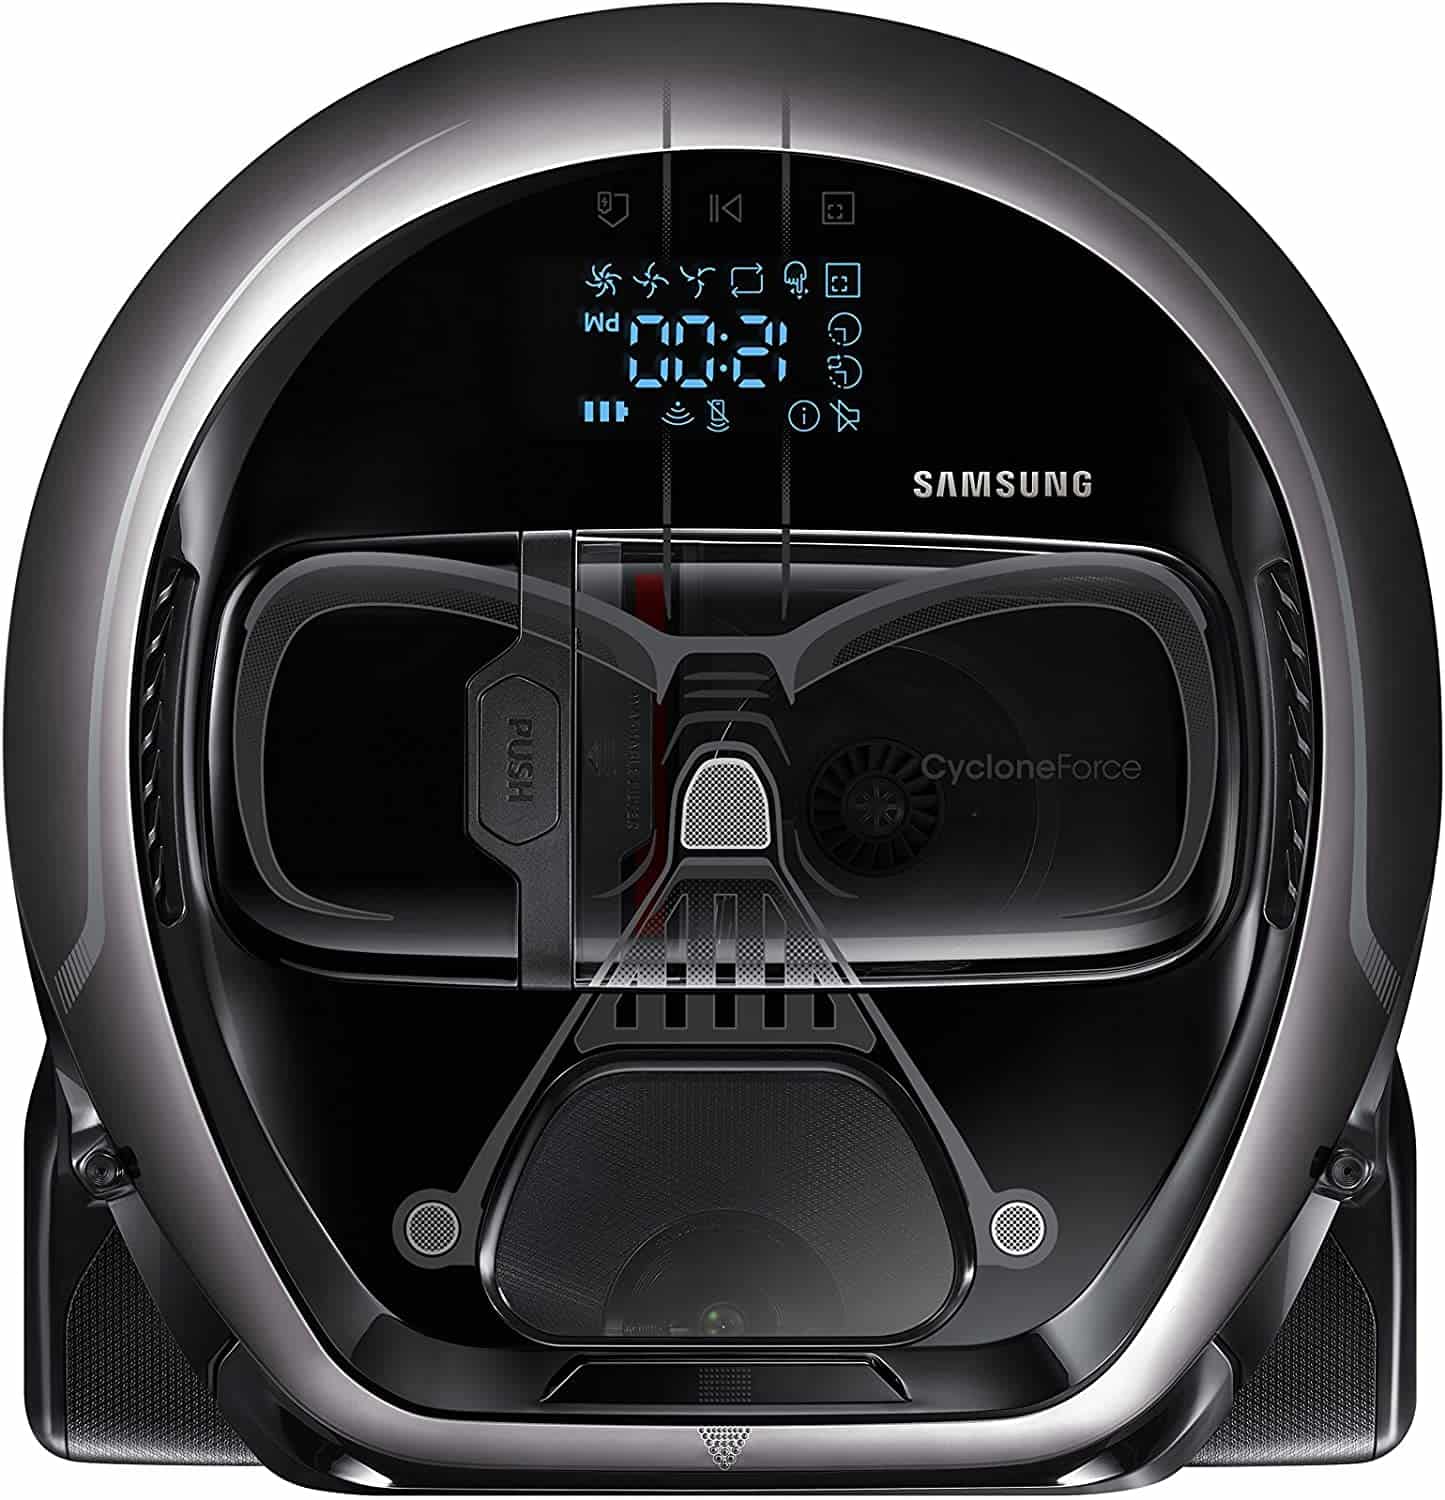 Cool Star Wars Droid-vacuüm: Samsung POWERbot Limited Edition